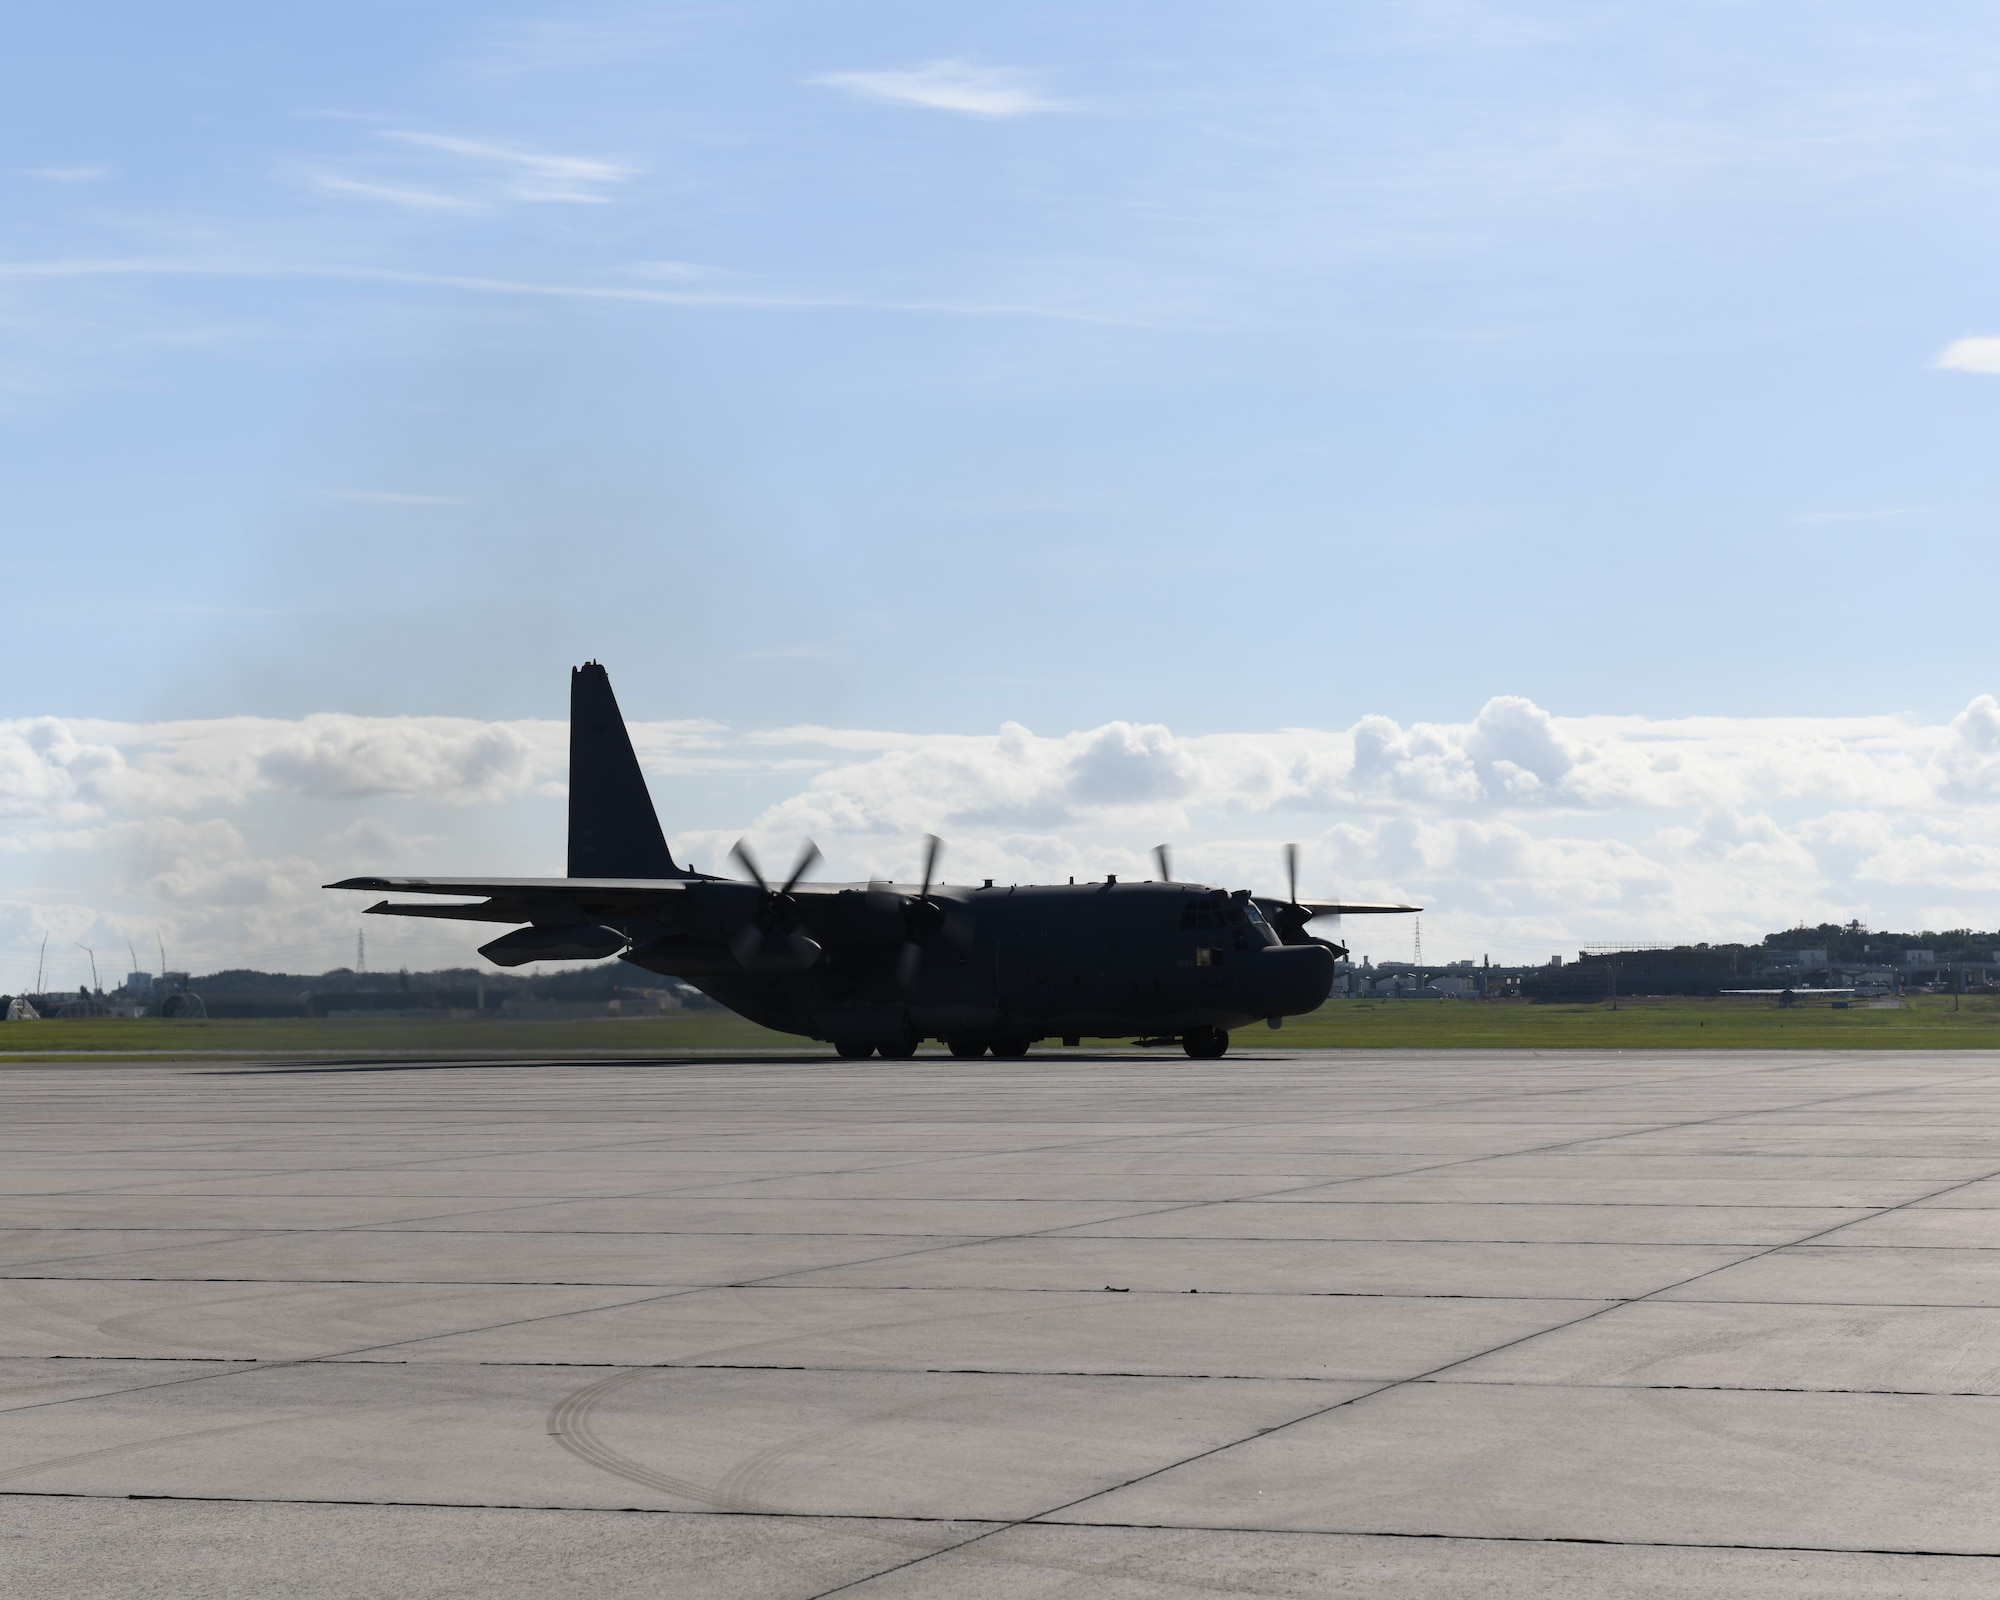 After 24 years of service in the Pacific the last of the Air Force Special Operations Command (AFSOC) MC-130H Combat Talon II aircraft returned to Hurlburt Field, Fla. Dec. 4, 2019.